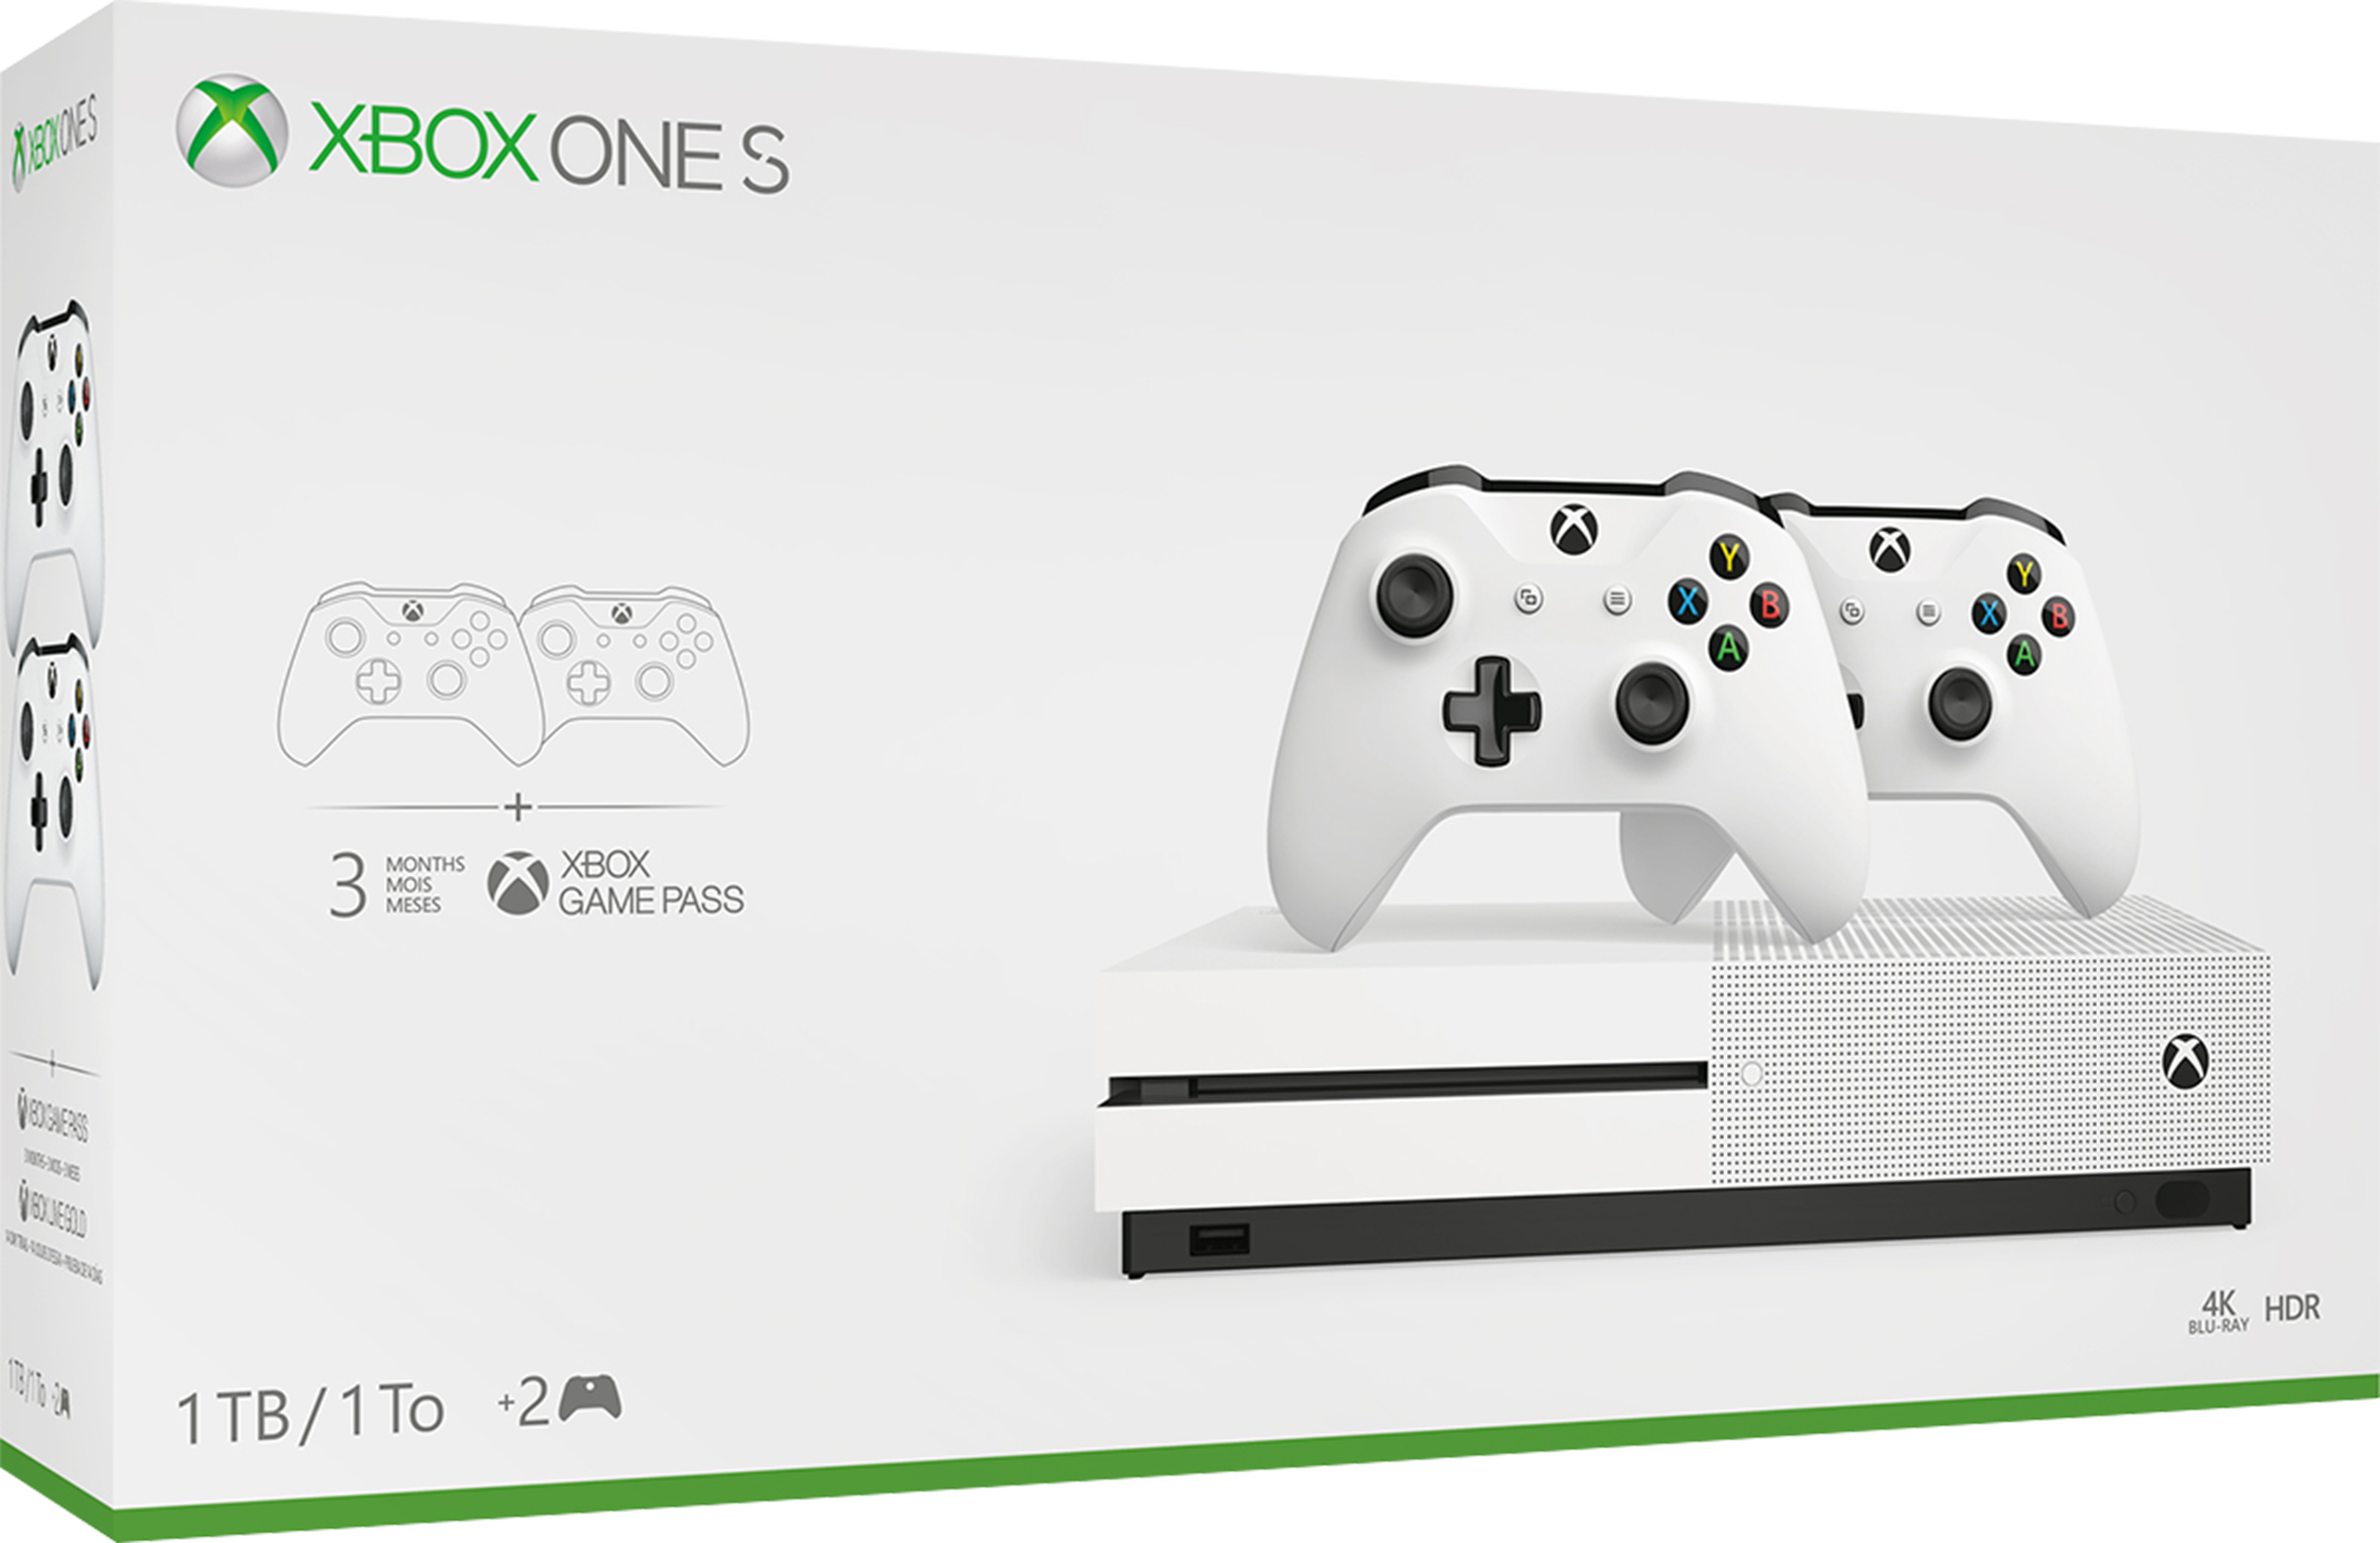 xbox one games on sale microsoft store